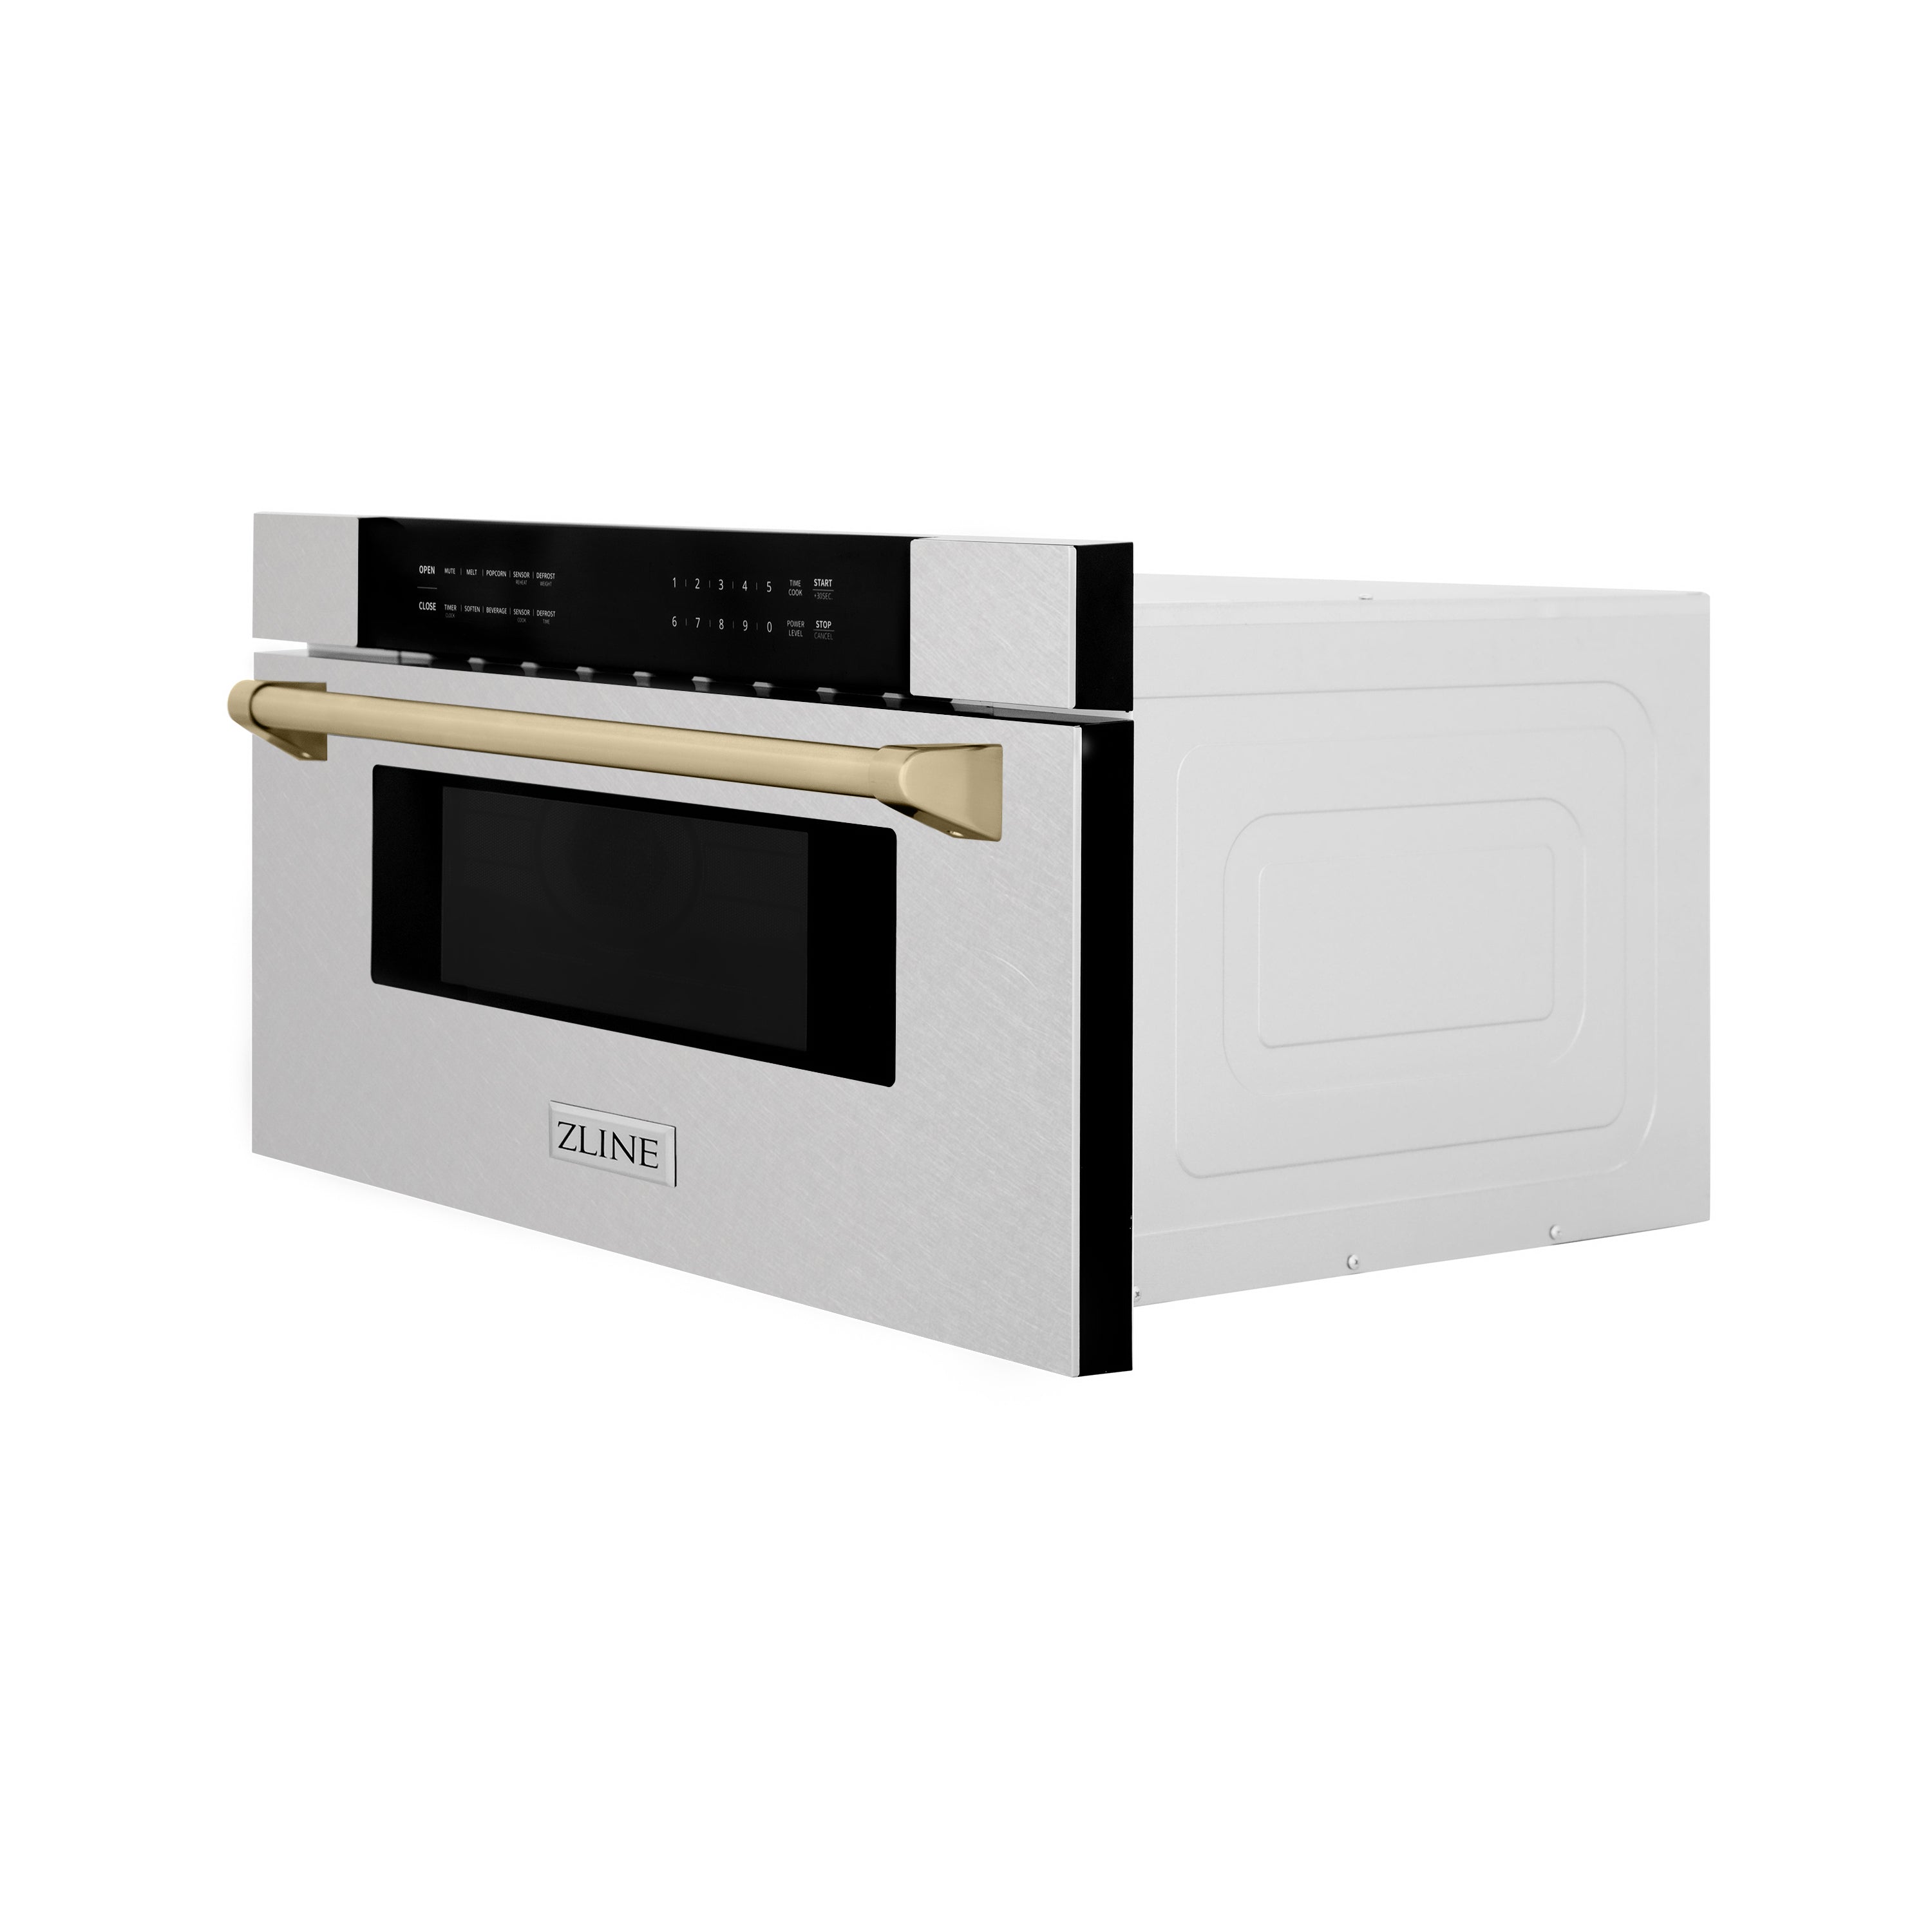 ZLINE Autograph Edition 30 in. 1.2 cu. ft. Built-In Microwave Drawer in Fingerprint Resistant Stainless Steel with Gold Accents (MWDZ-30-SS-G) Side View Drawer Closed